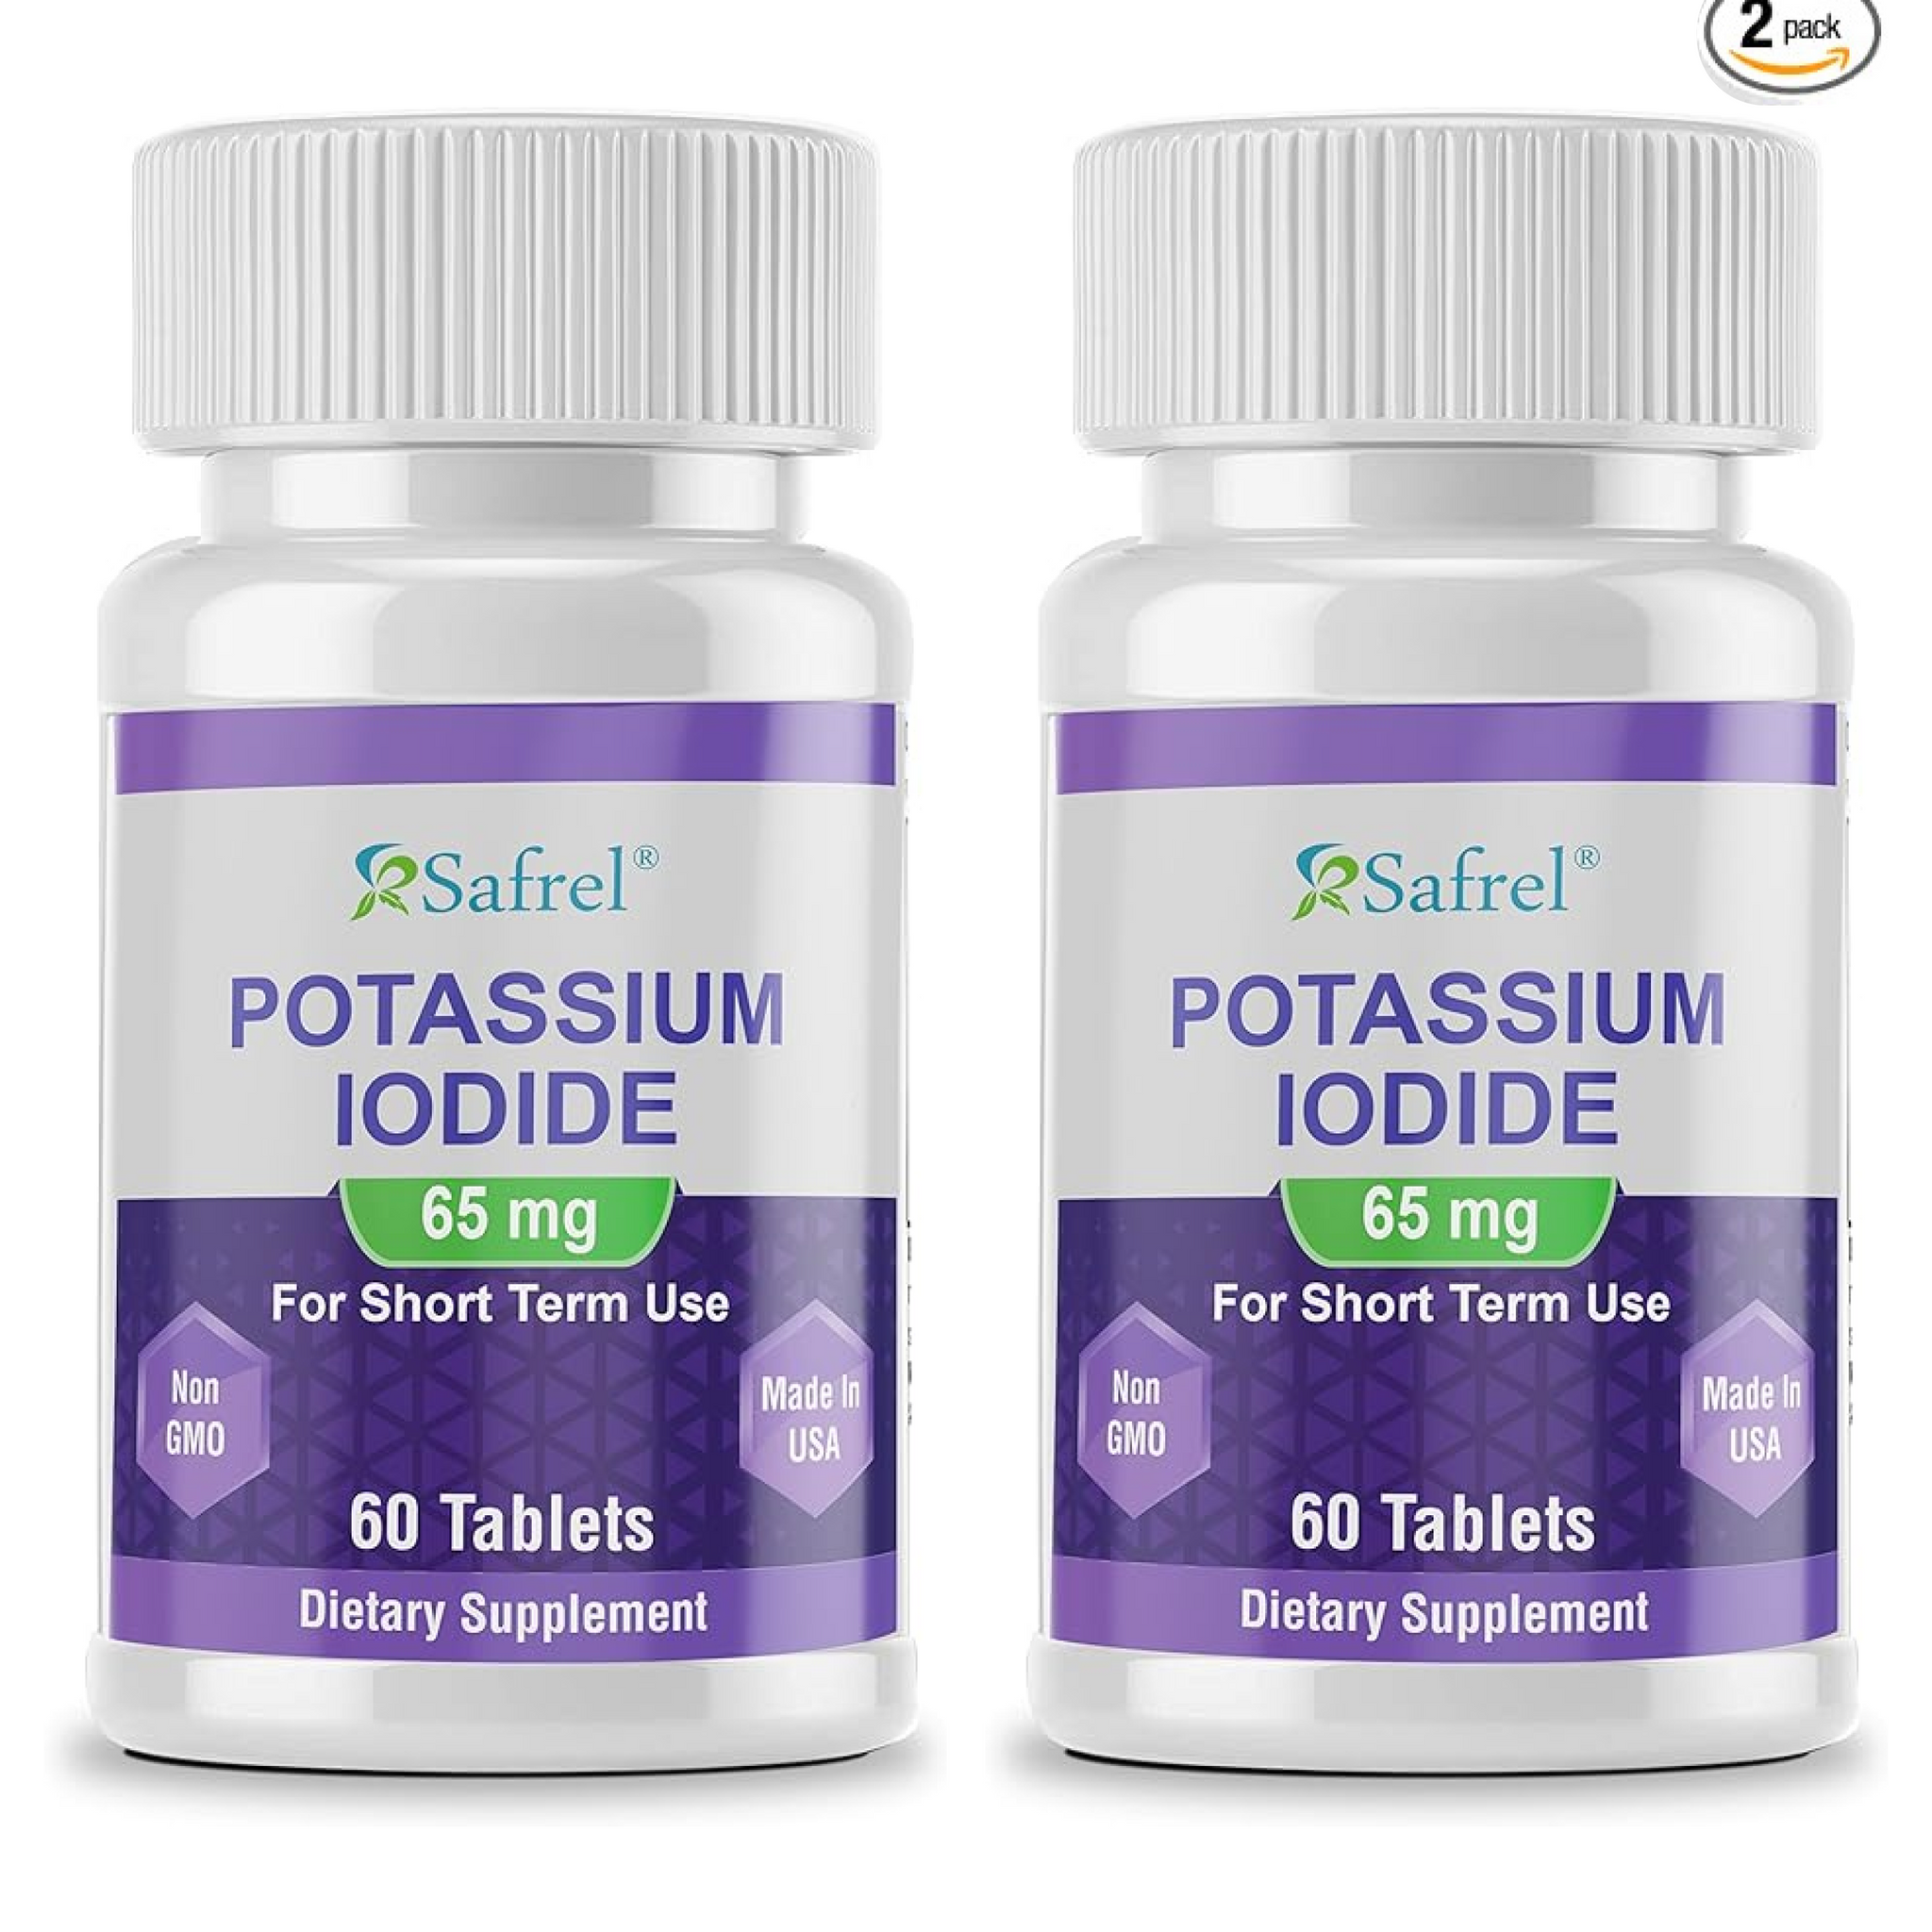 2 Pack - Safrel Potassium Iodide 65 mg per Serving, 60 Tablets | Thyroid Support | Best Natural Dietary Supplement | Made in USA | Kosher